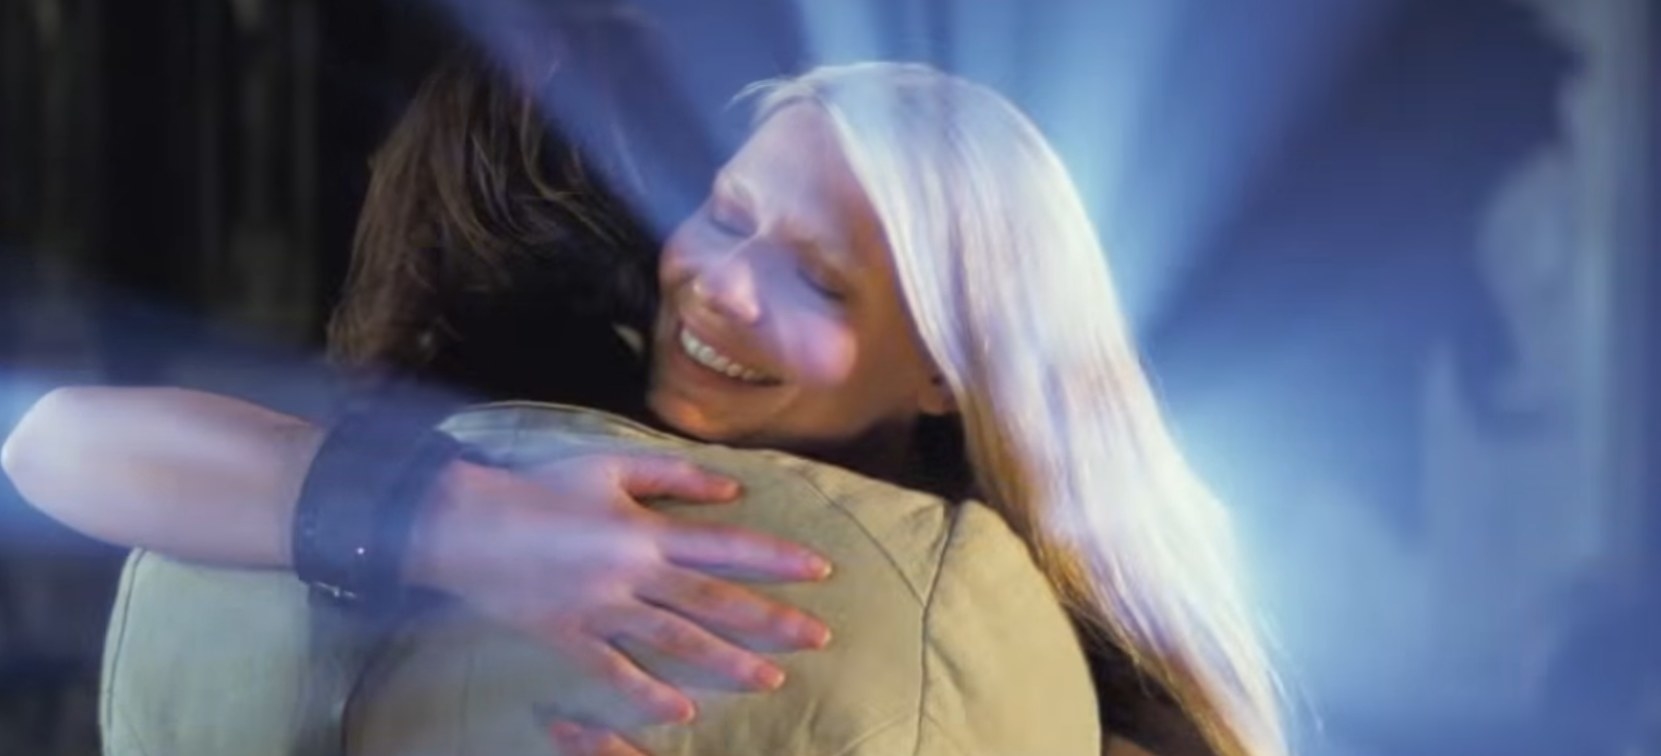 Claire Danes and Charlie Cox hugging as she glows in Stardust